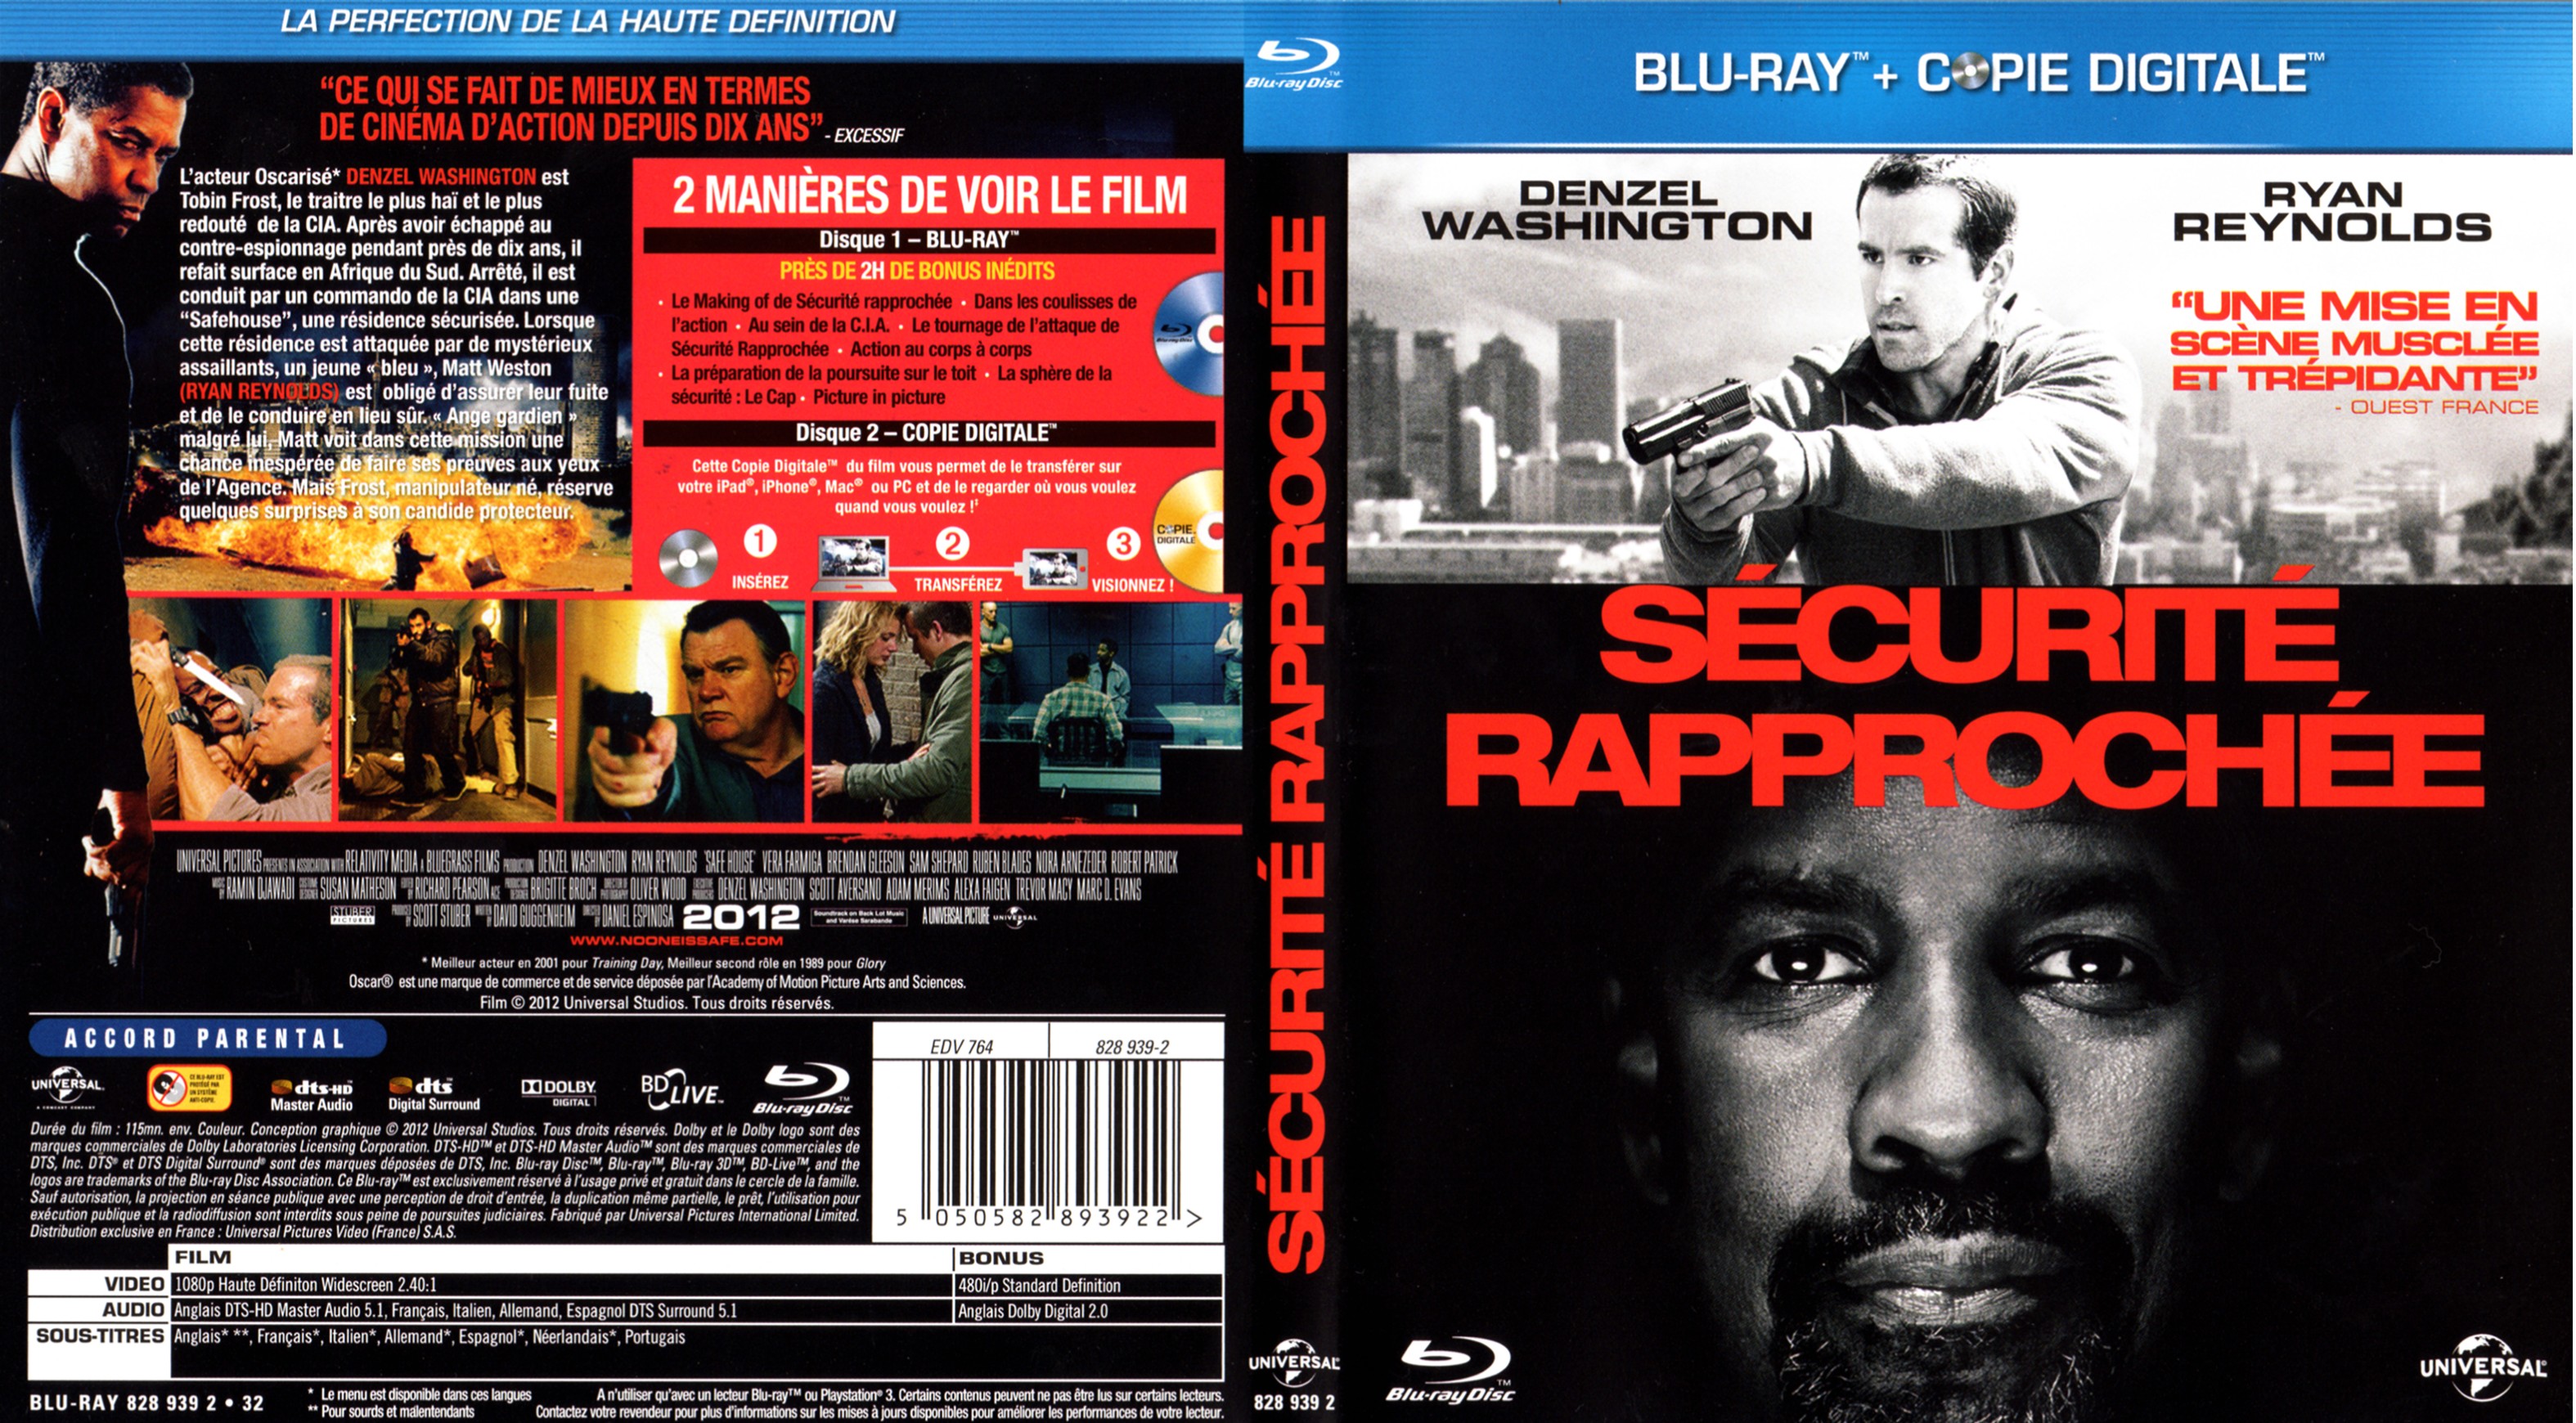 Jaquette DVD Scurit rapproche (BLU-RAY)